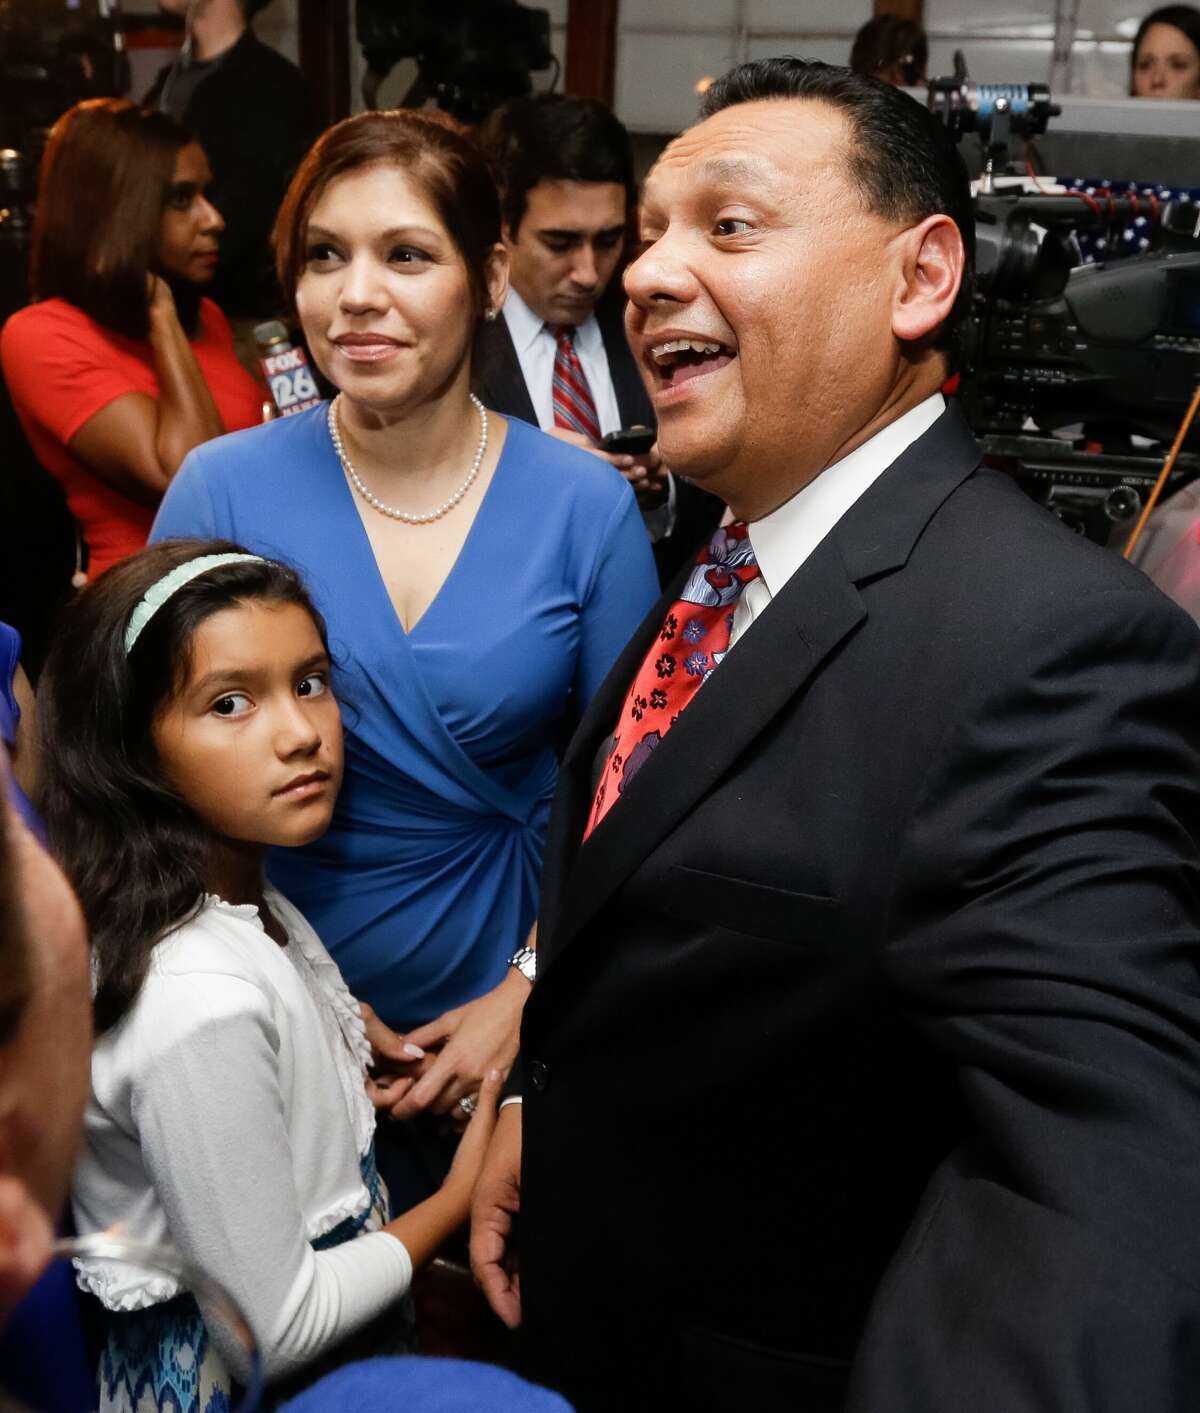 Candidate for Harris County Sheriff Ed Gonzalez, His wife Melissa, and their daughter Erika,7, are greeted by supporters during election watch party at Fitzgerald's, 2706 White Oak Dr., Tuesday, Nov. 8, 2016 in Houston. ( Melissa Phillip / Houston Chronicle )